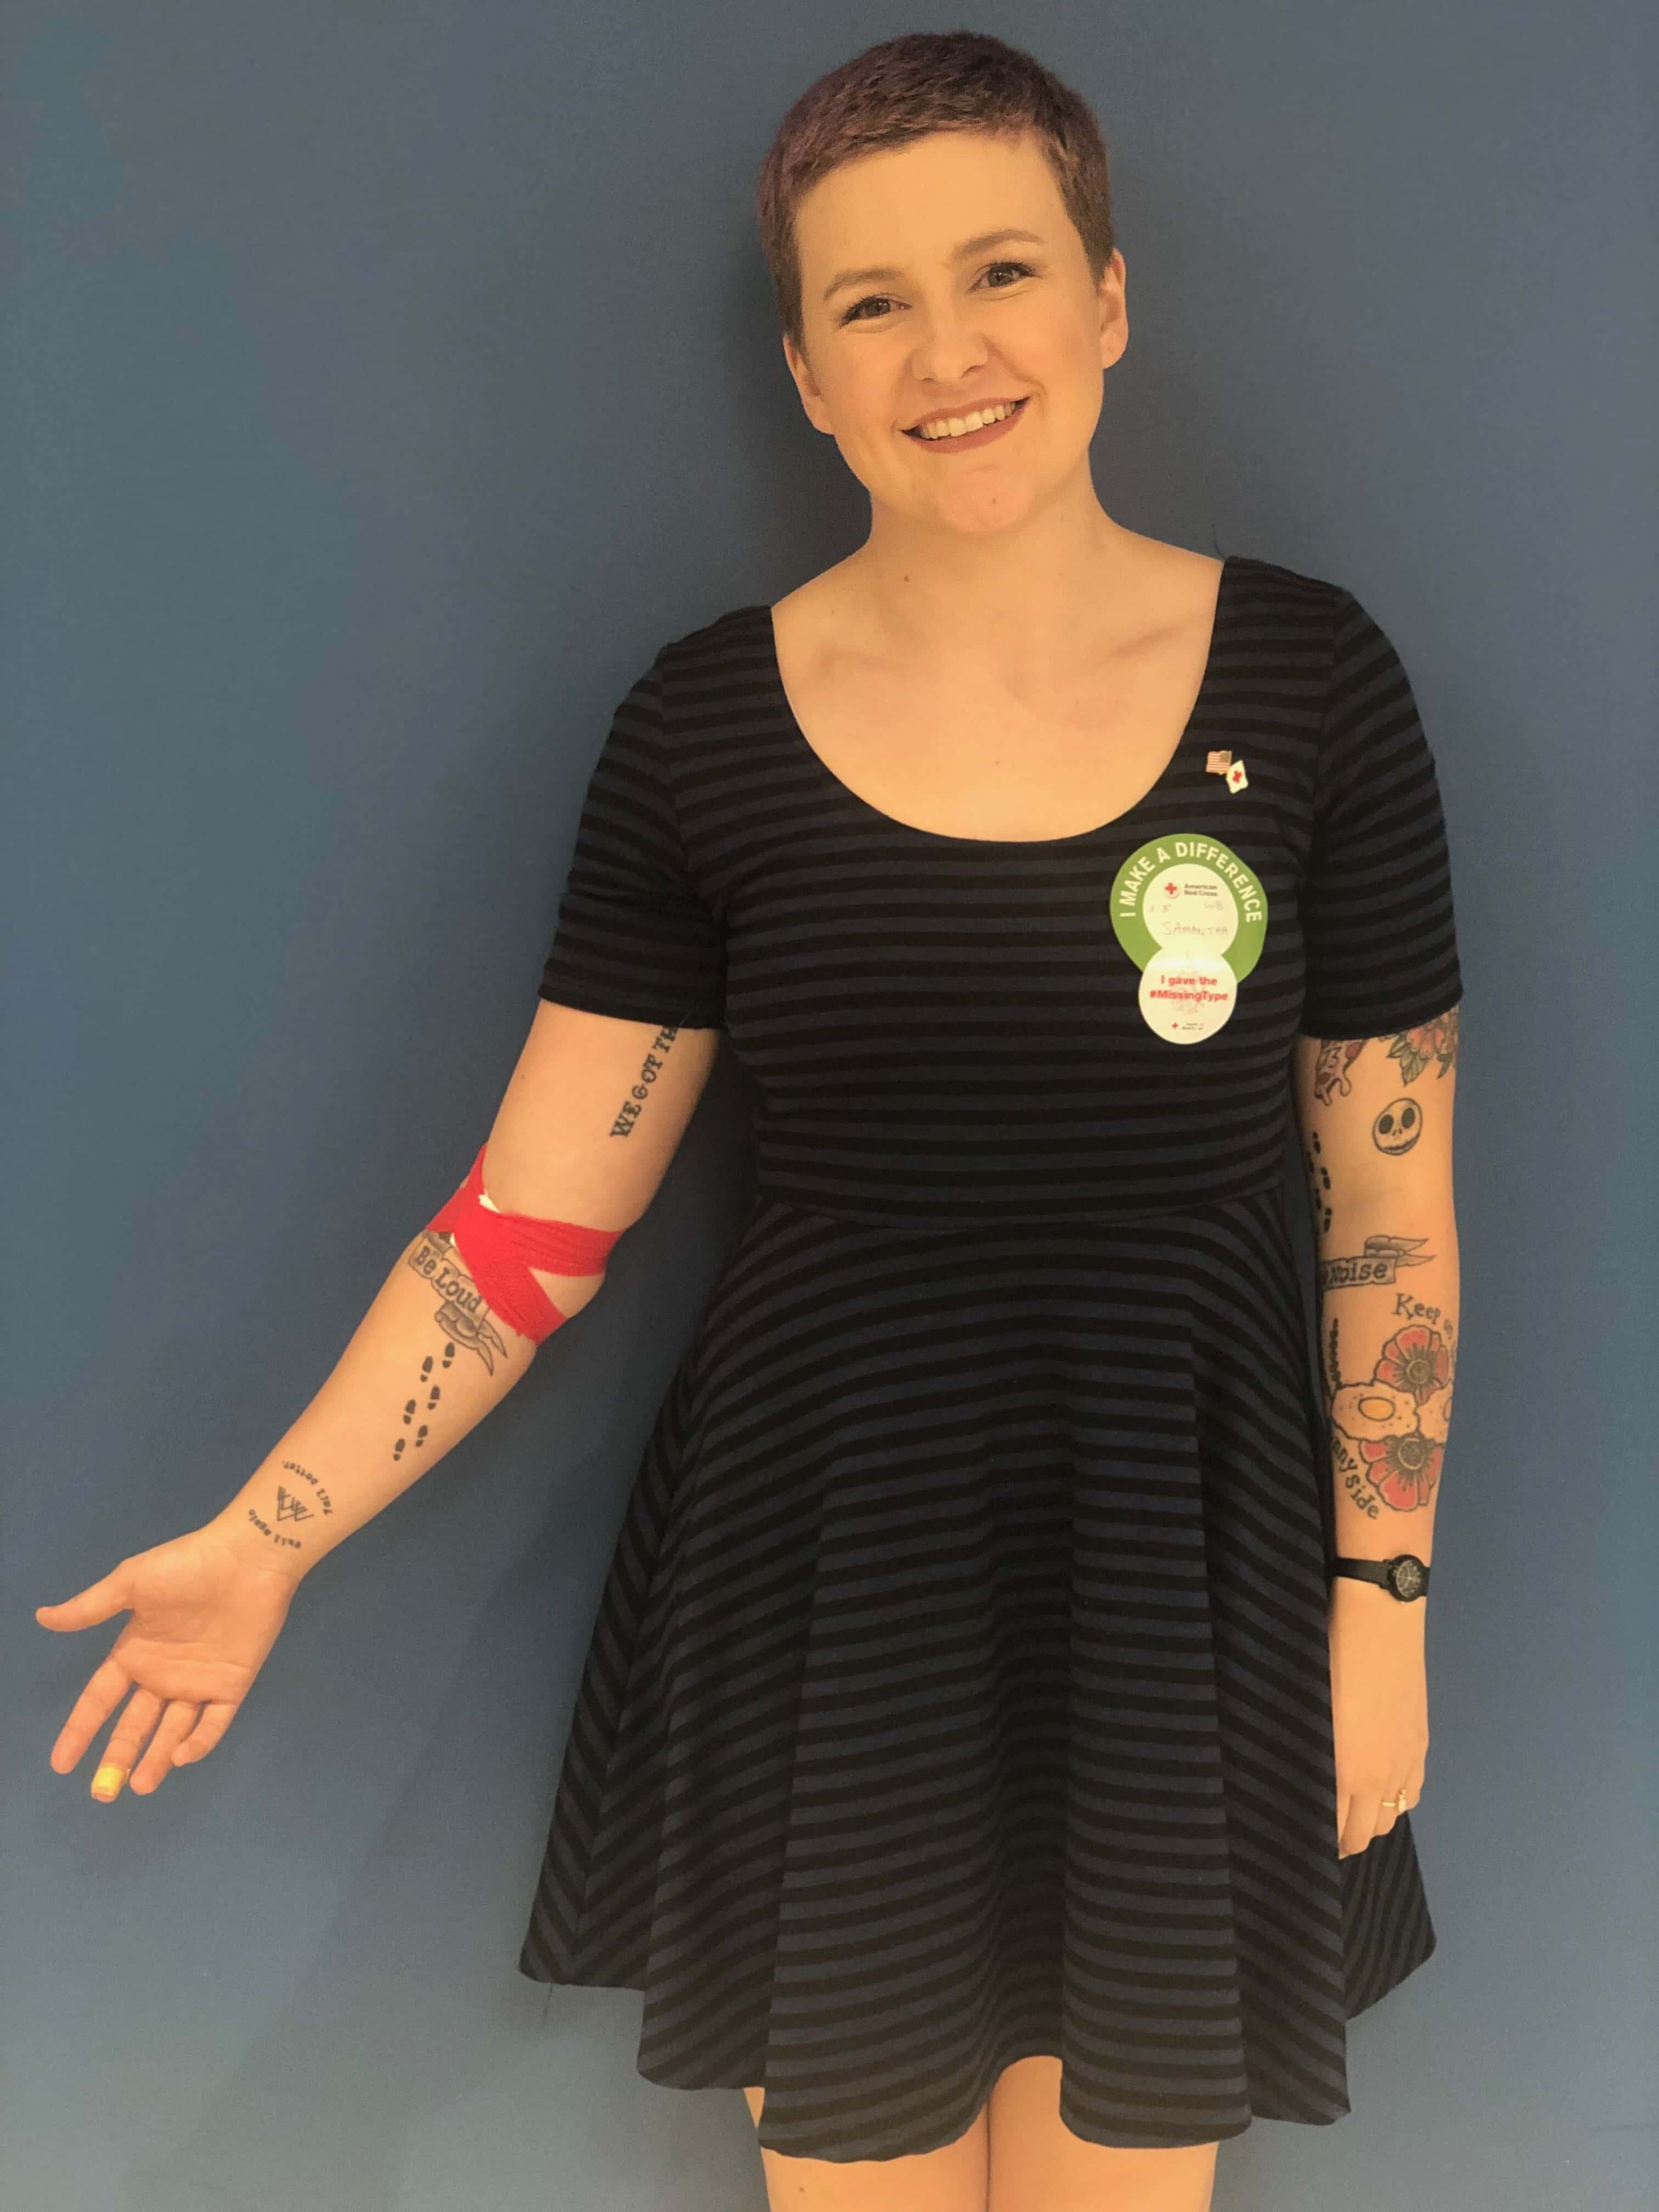 Donating Blood with Tattoos: Can I Really Do Both?